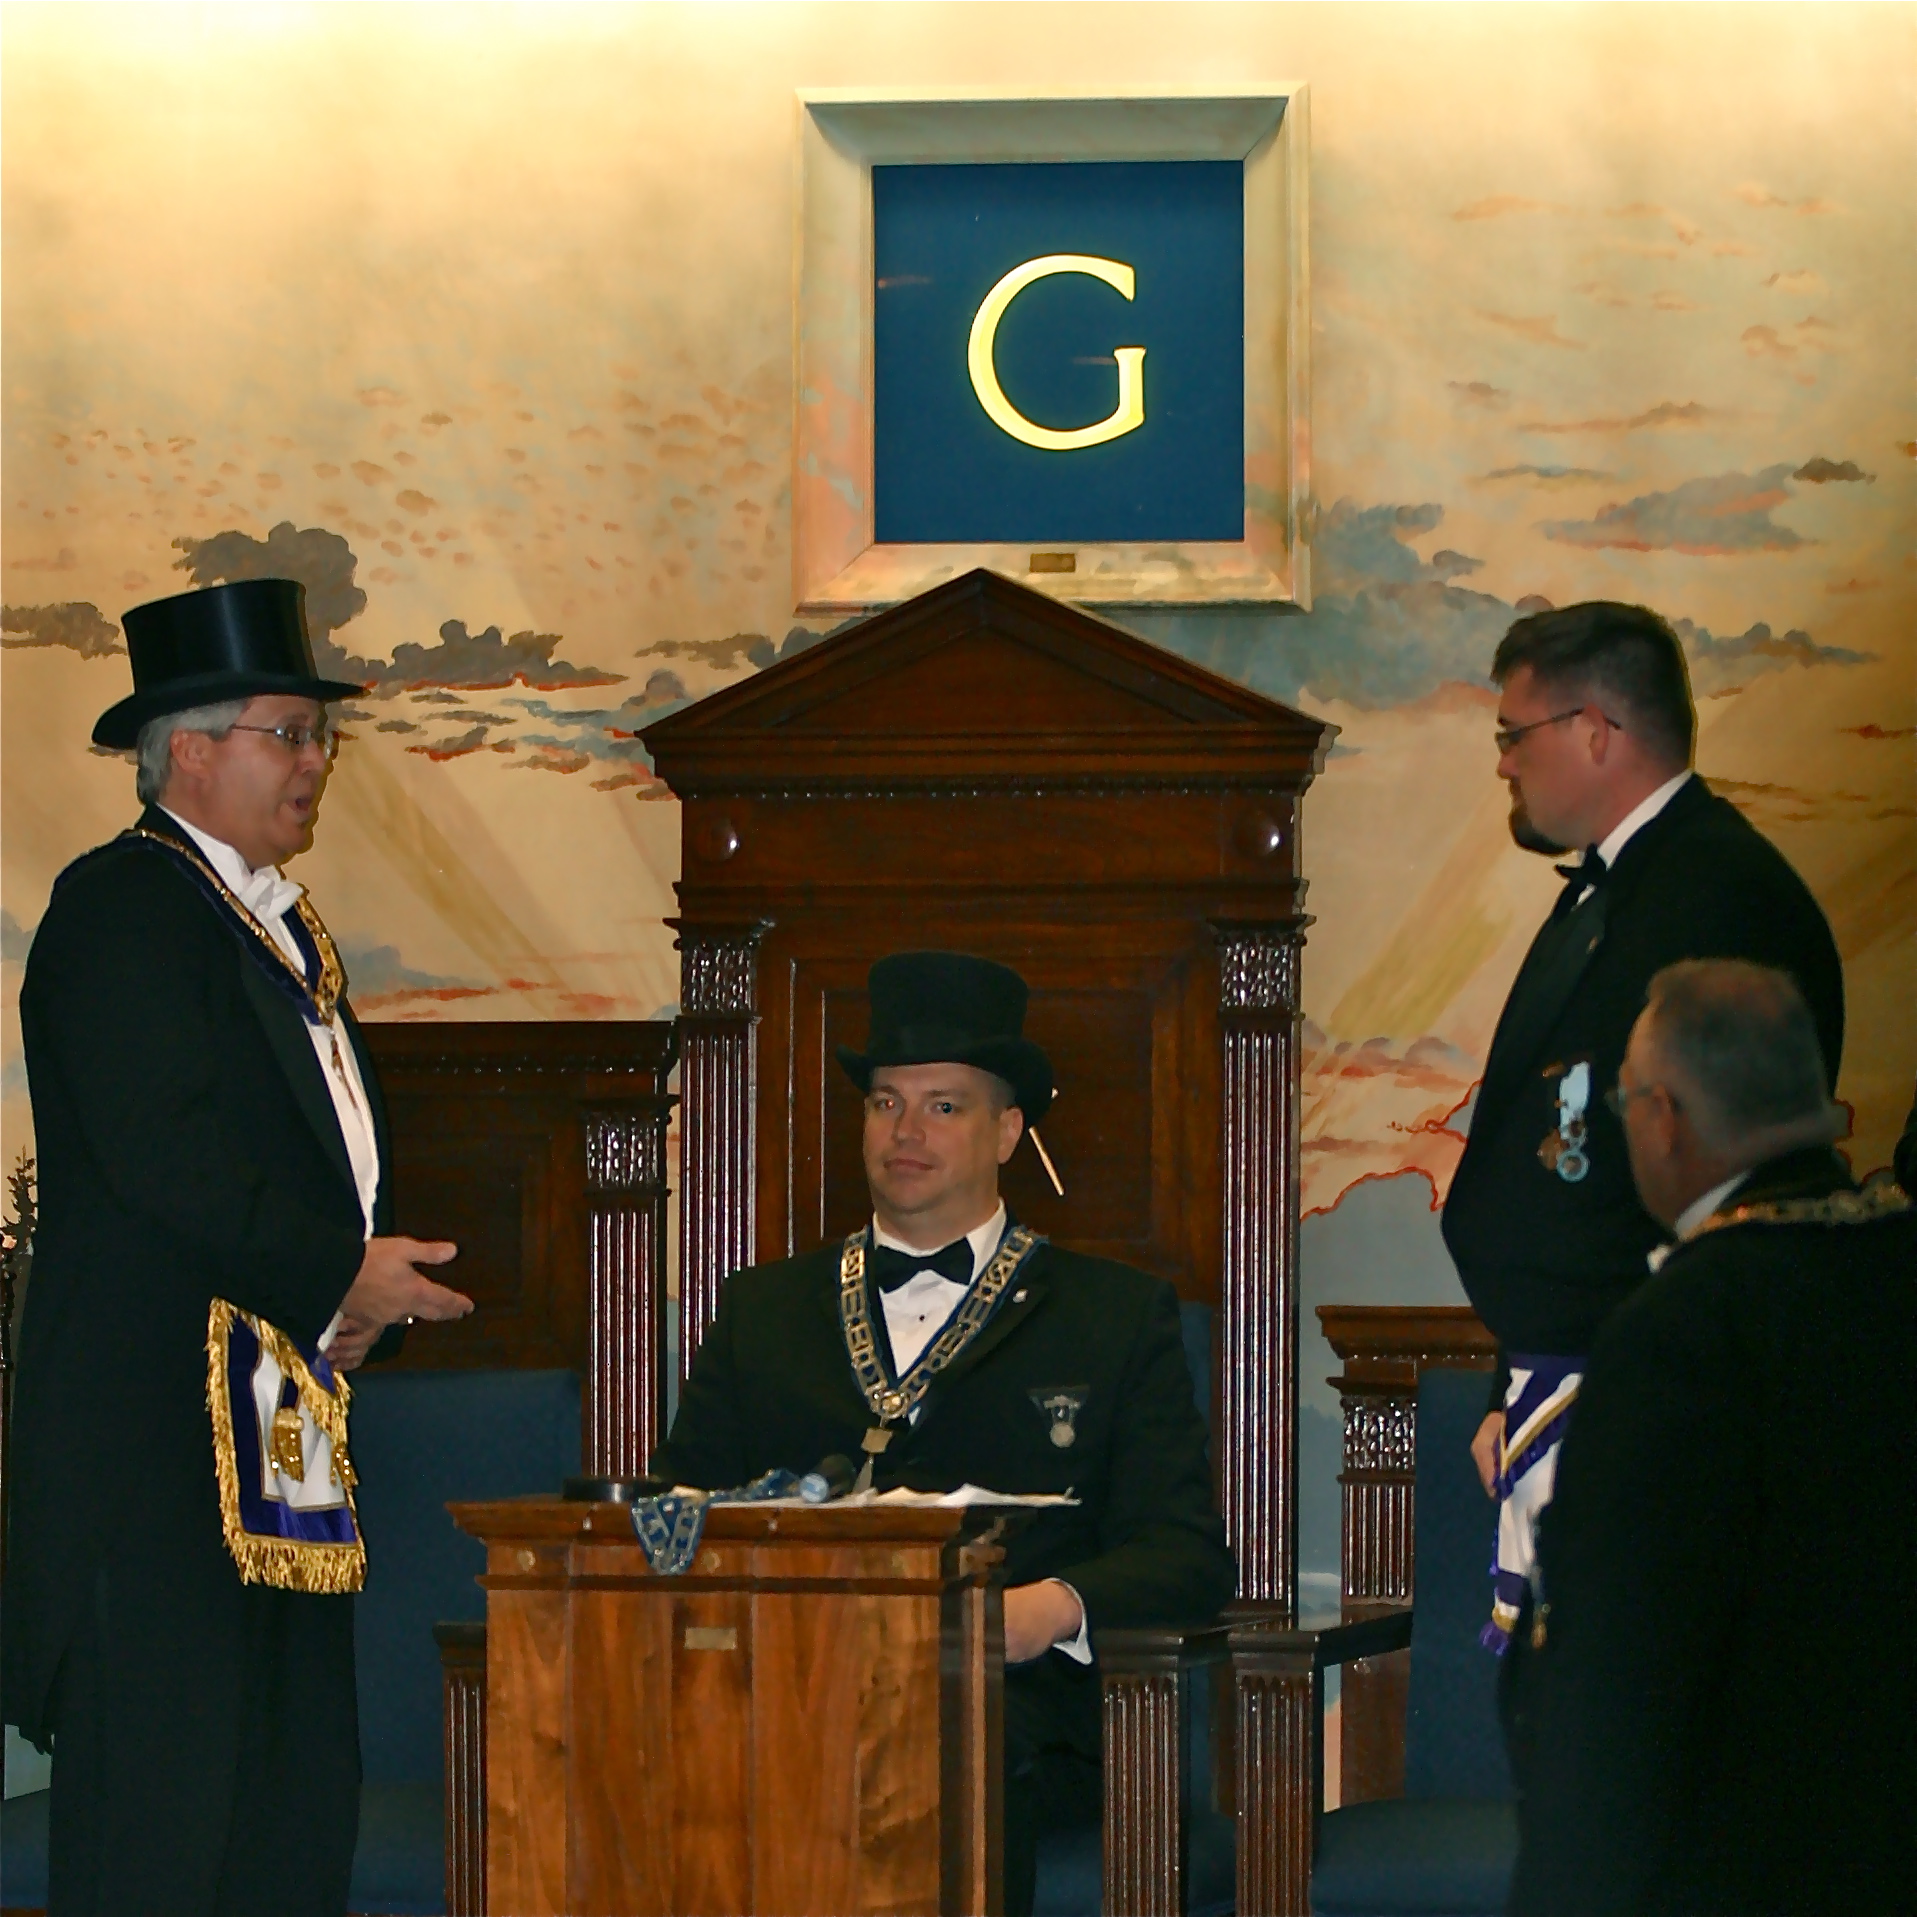 Congratulations to our new Worshipful Master & Officers for 2011-2012